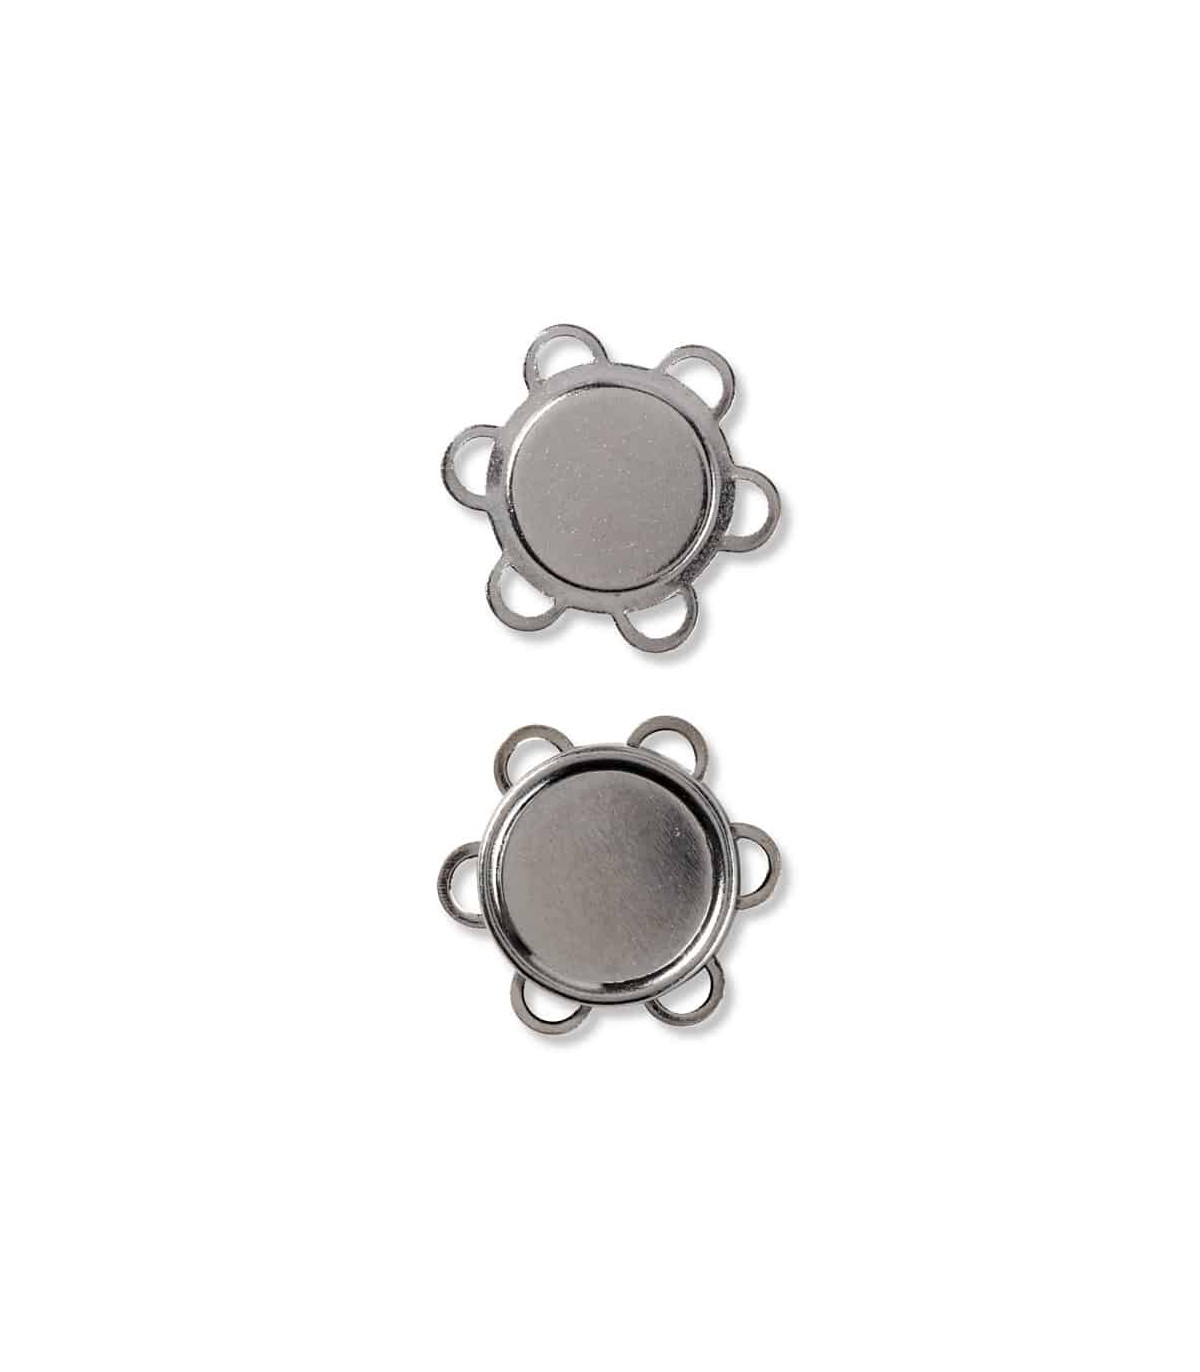 Prym 1 416470 Magnetic sew-on Buttons 19 mm Silver col, Metal